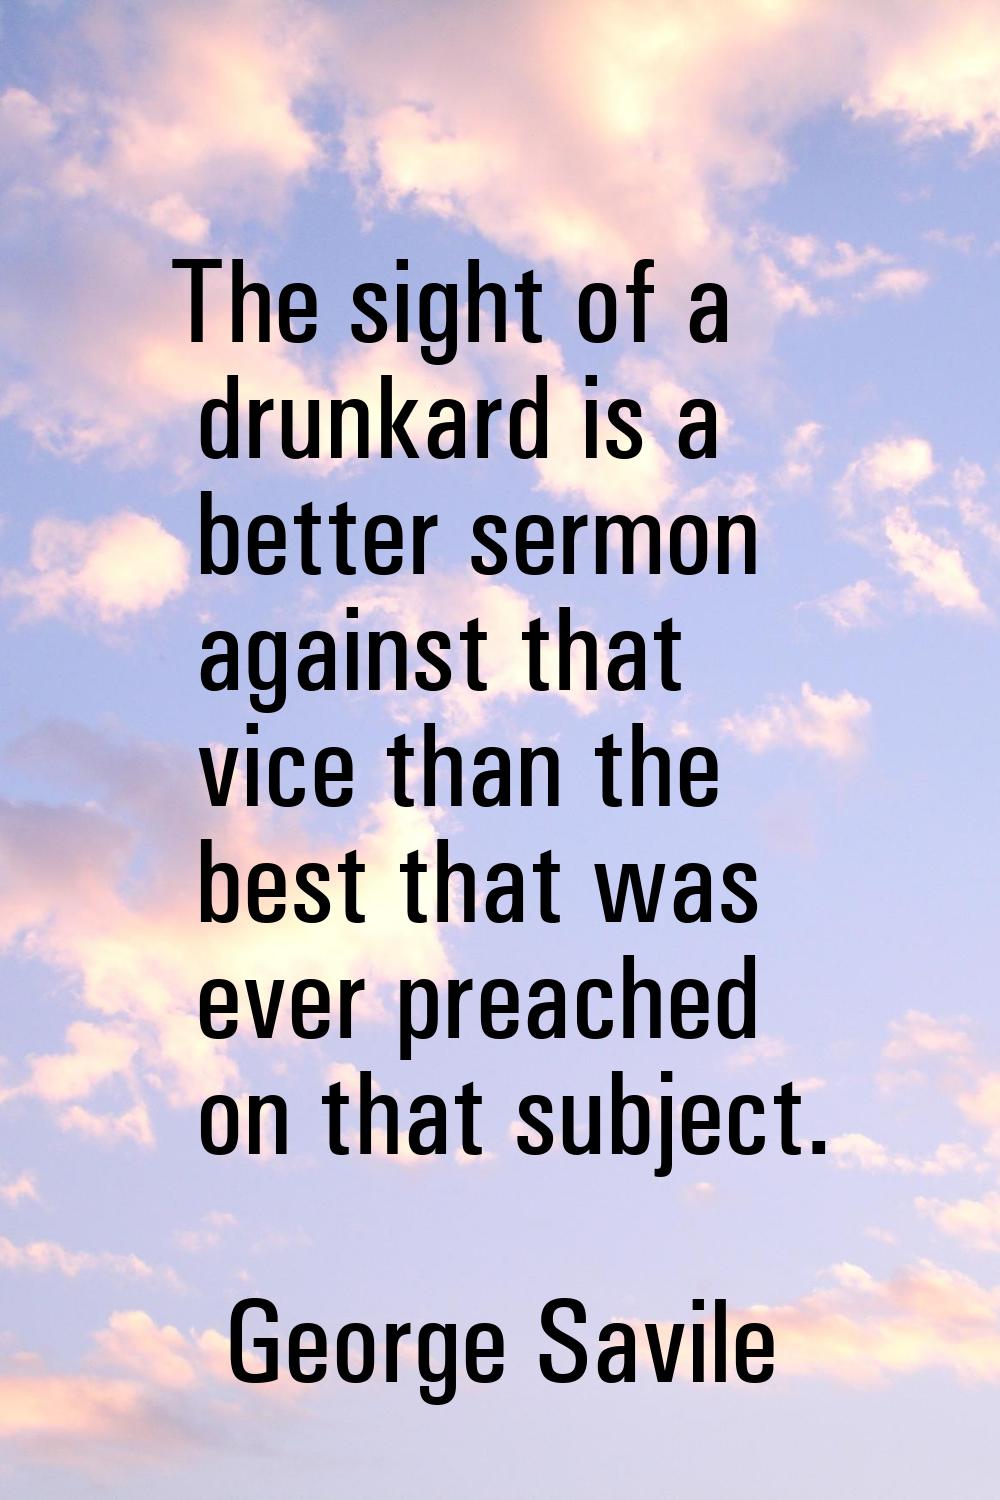 The sight of a drunkard is a better sermon against that vice than the best that was ever preached o